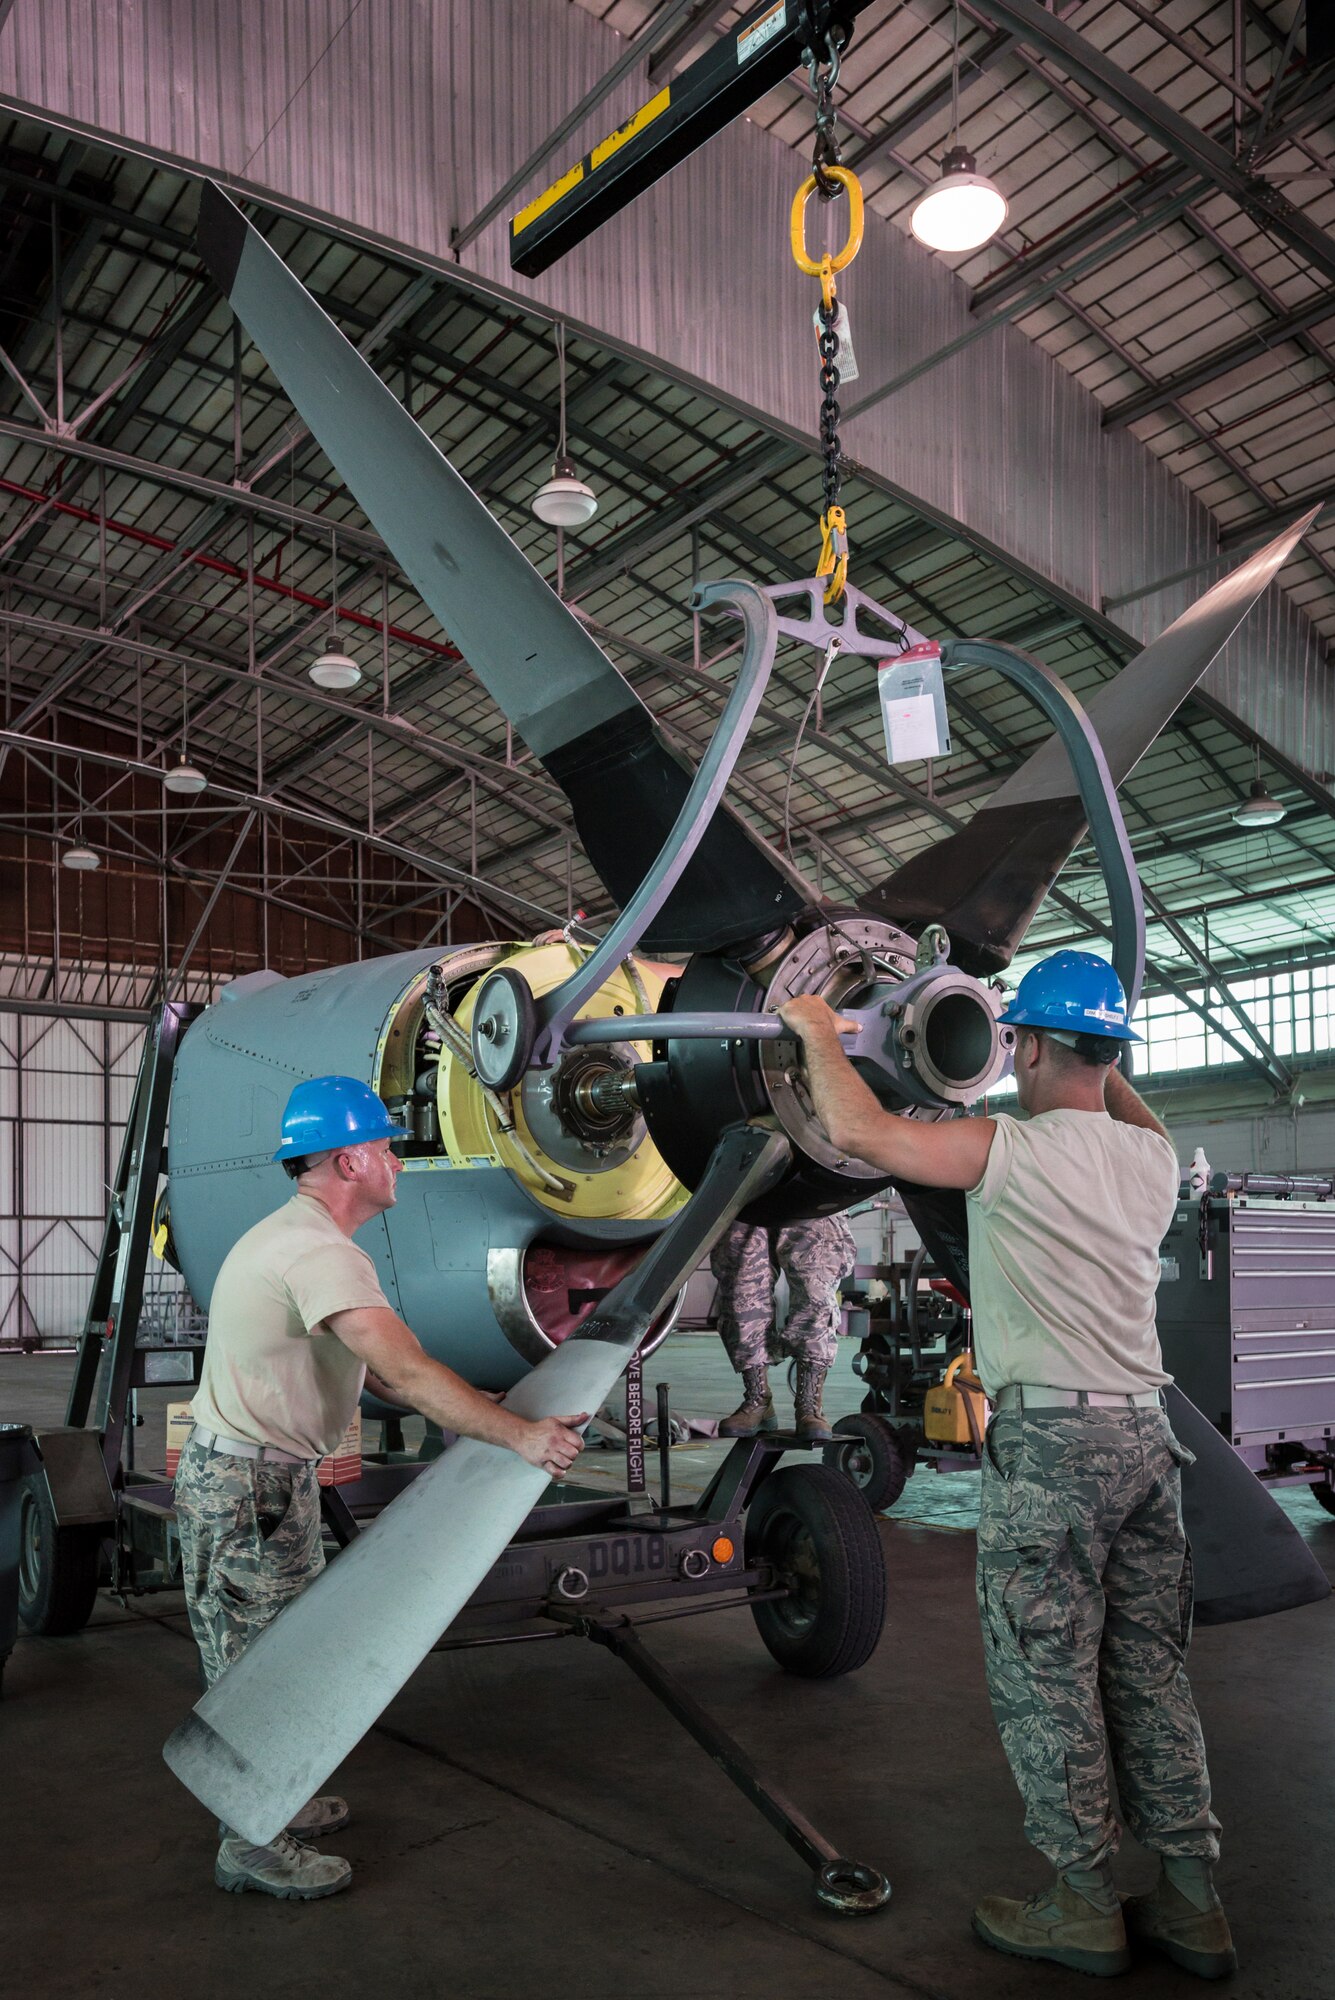 U.S. Air Force Staff Sgt. Michael Marks (left) and U.S. Air Force Tech. Sgt. Alan Broadus, propulsion mechanics from the Kentucky Air National Guard’s 123rd Airlift Wing, mount a propeller to a C-130 engine at the Air National Guard’s Air Dominance Center in Savannah, Ga., June 15, 2016. Both Airmen are attending Maintenance University here, a weeklong course designed to provide intensive instruction in aircraft maintenance. Now in its eighth year, Maintenance University is sponsored by the 123rd Airlift Wing. (U.S. Air National Guard photo by Lt. Col. Dale Greer)